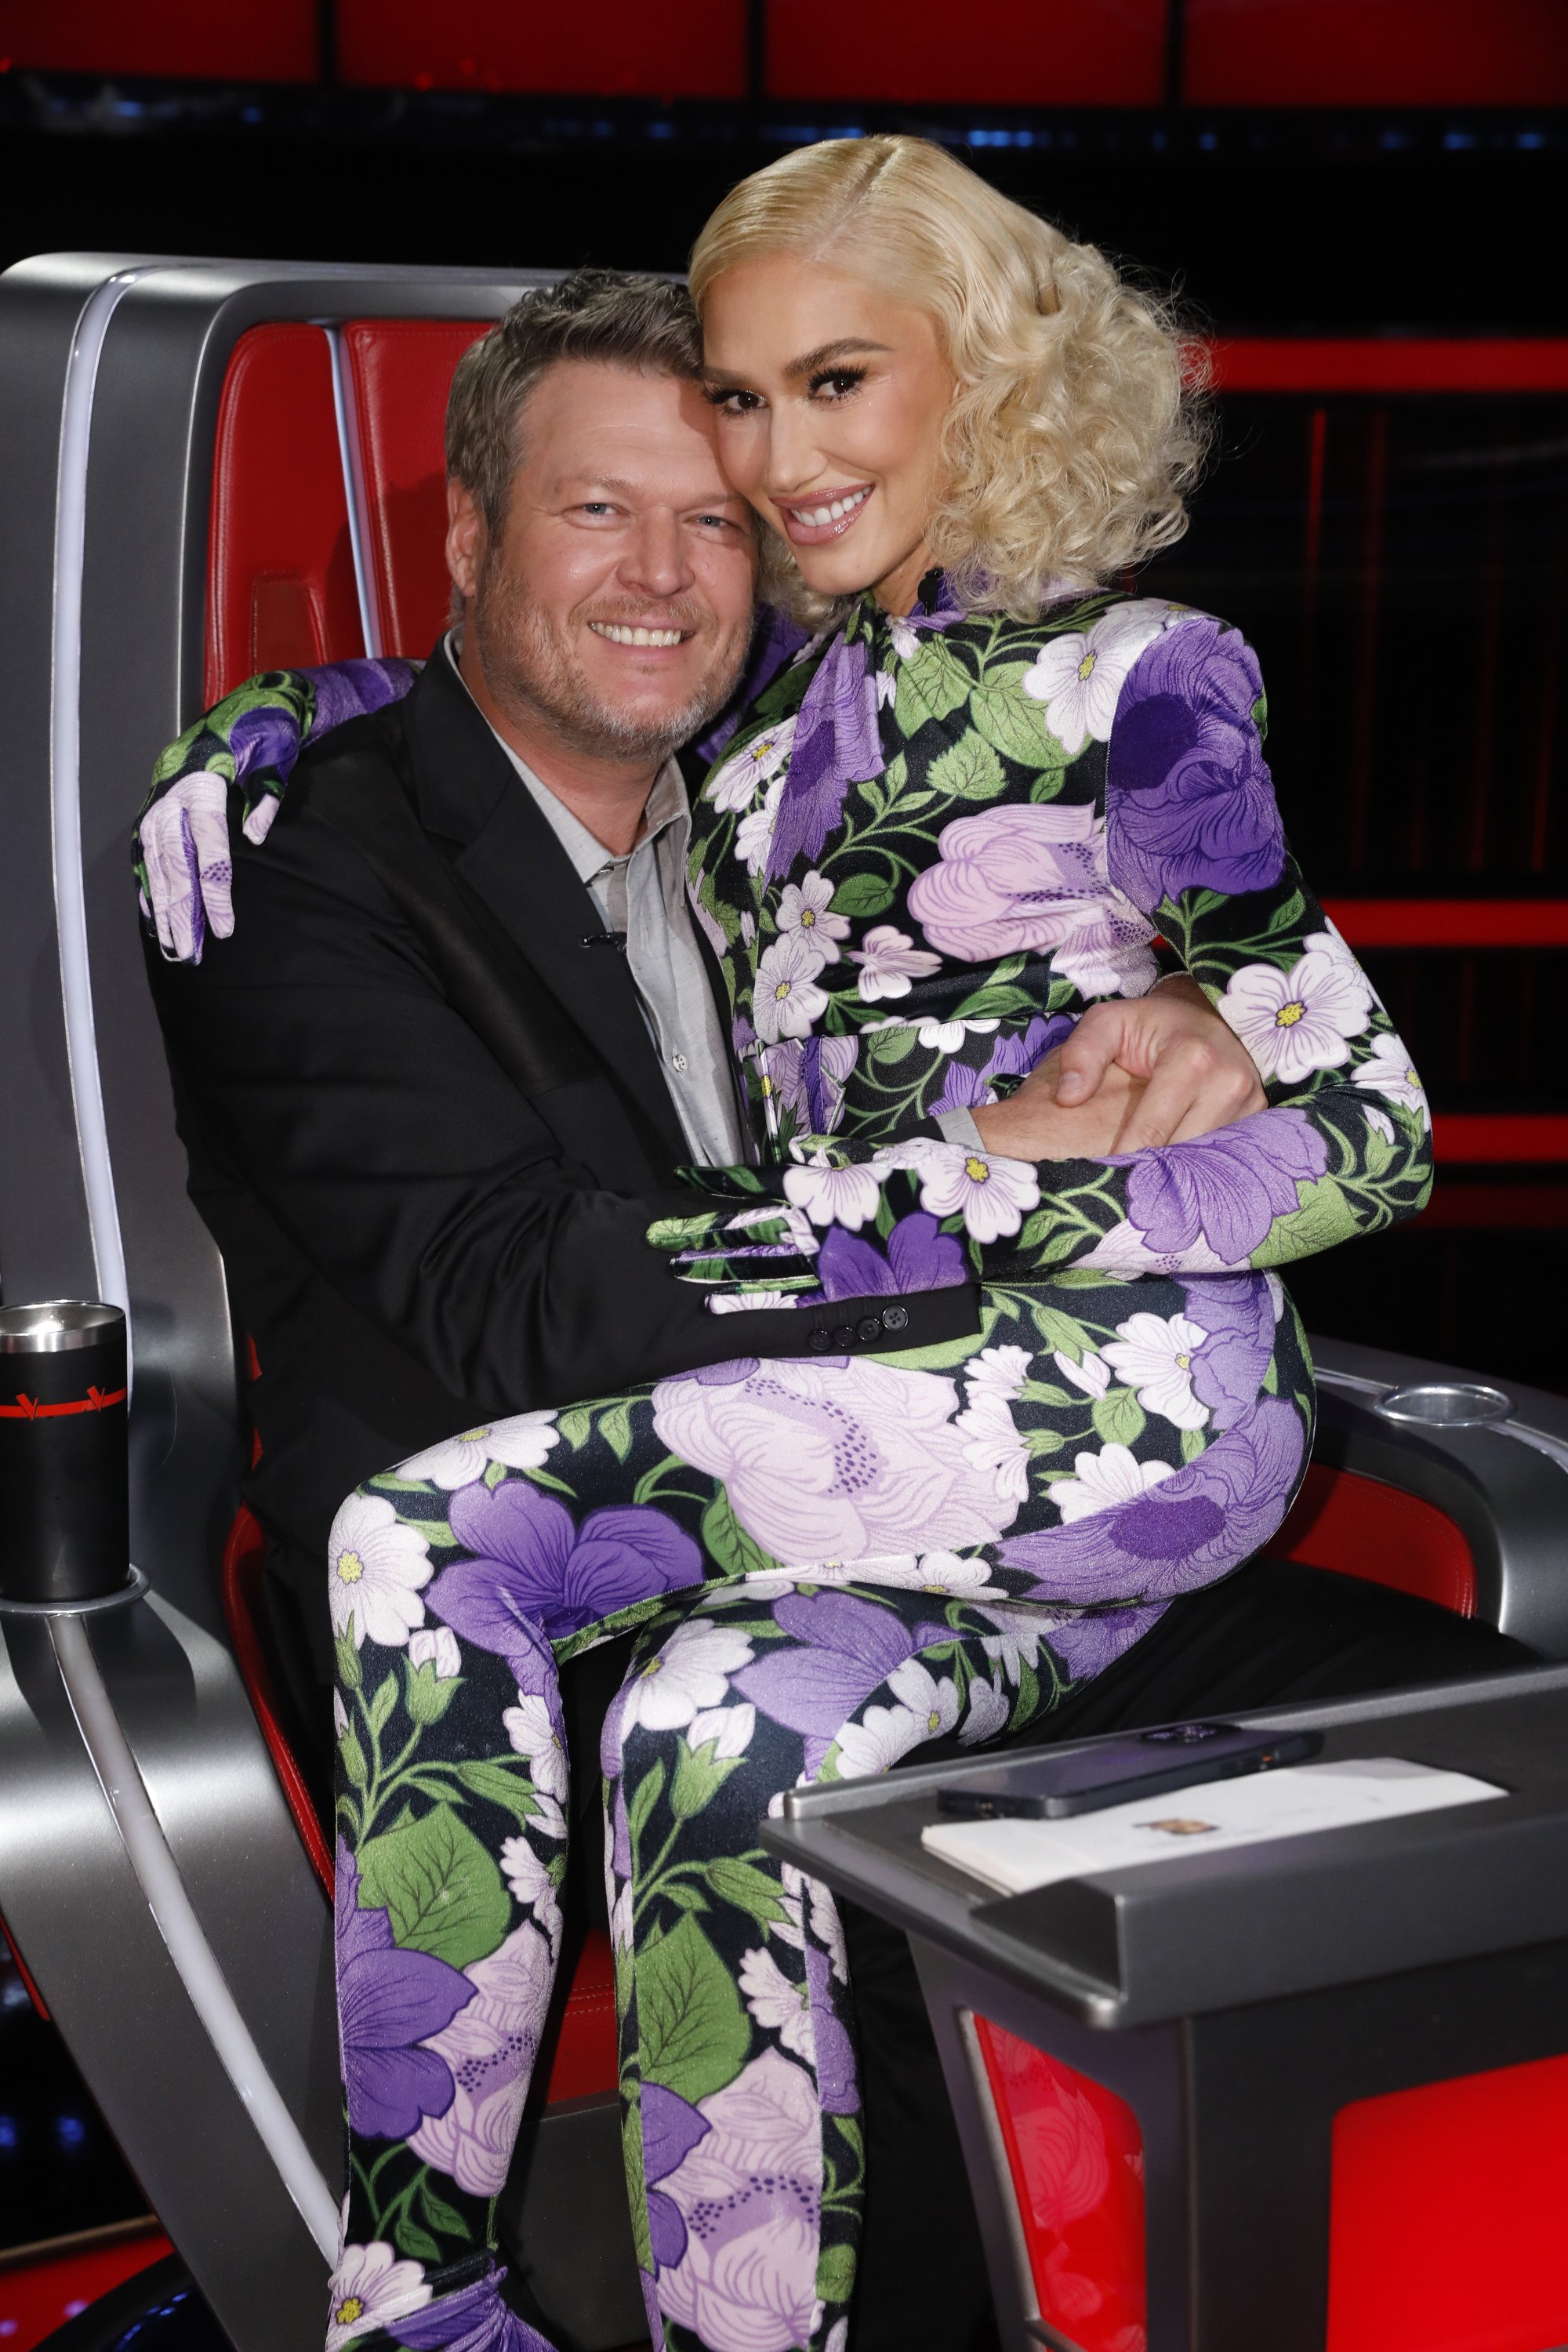 Blake Shelton and Gwen Stefani at "The Voice" live semi-final top 8 performances on December 5, 2022 | Source: Getty Images